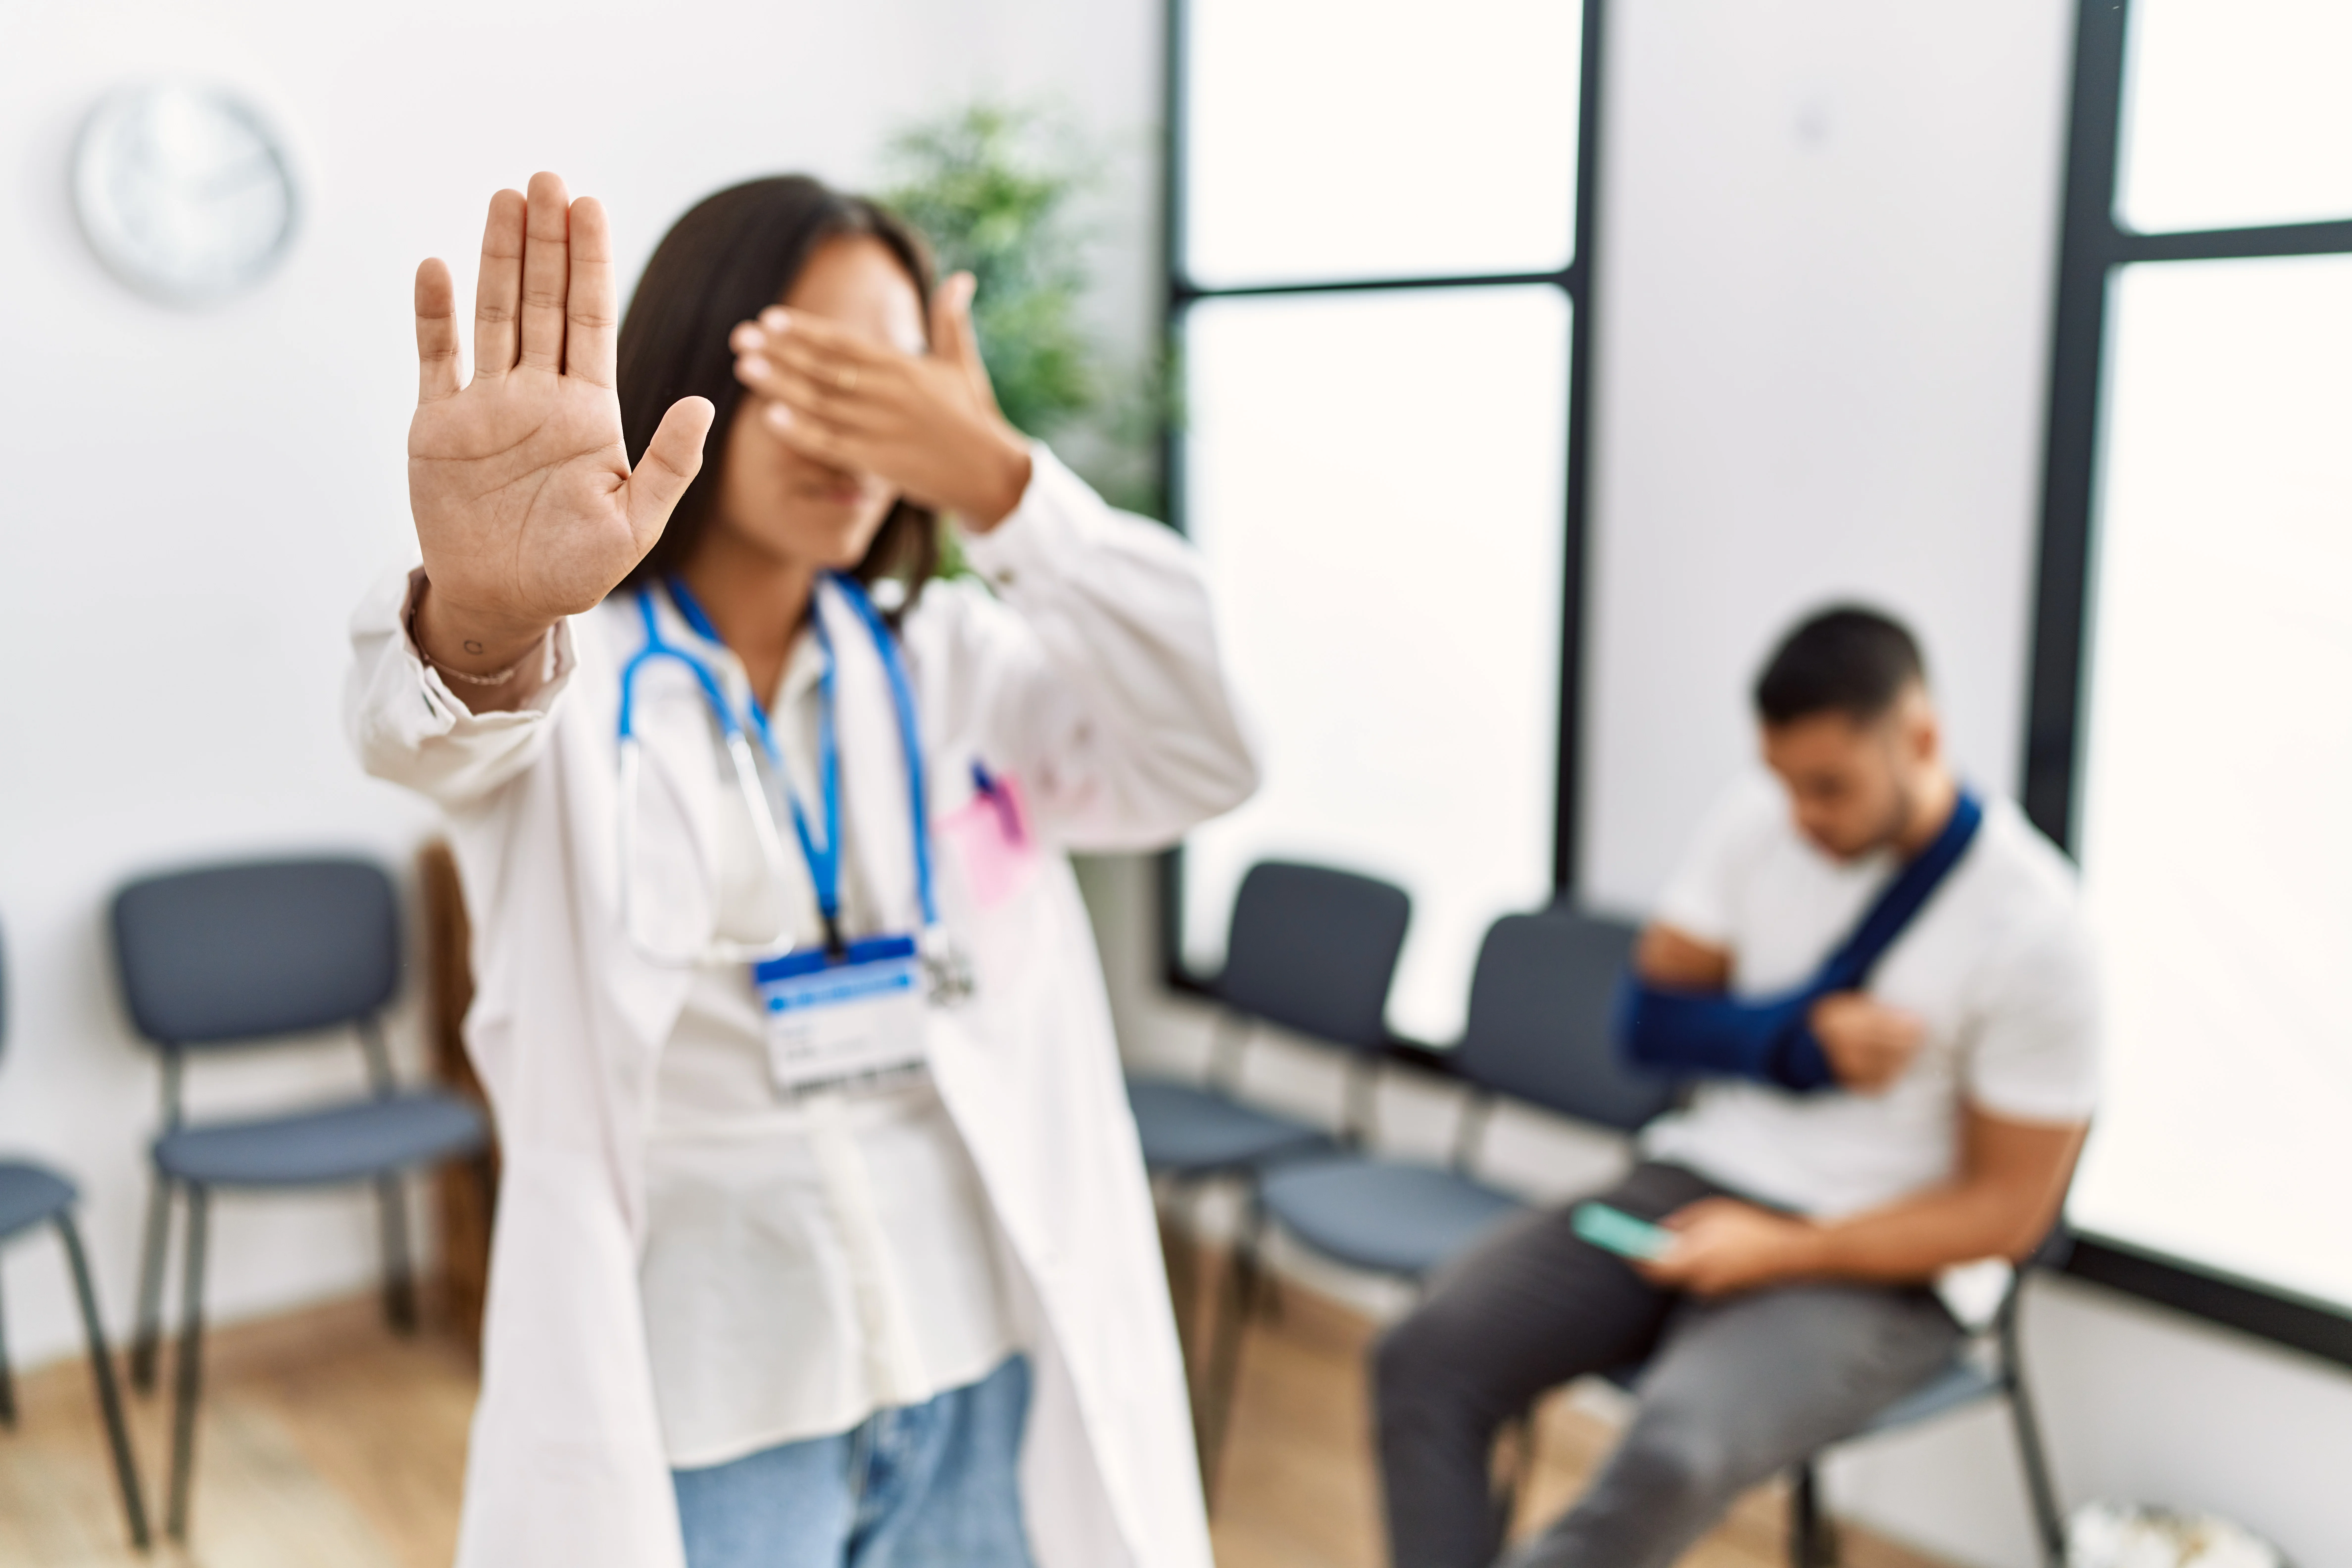 What You Should Know About Increasing Violence in the Healthcare Workplace